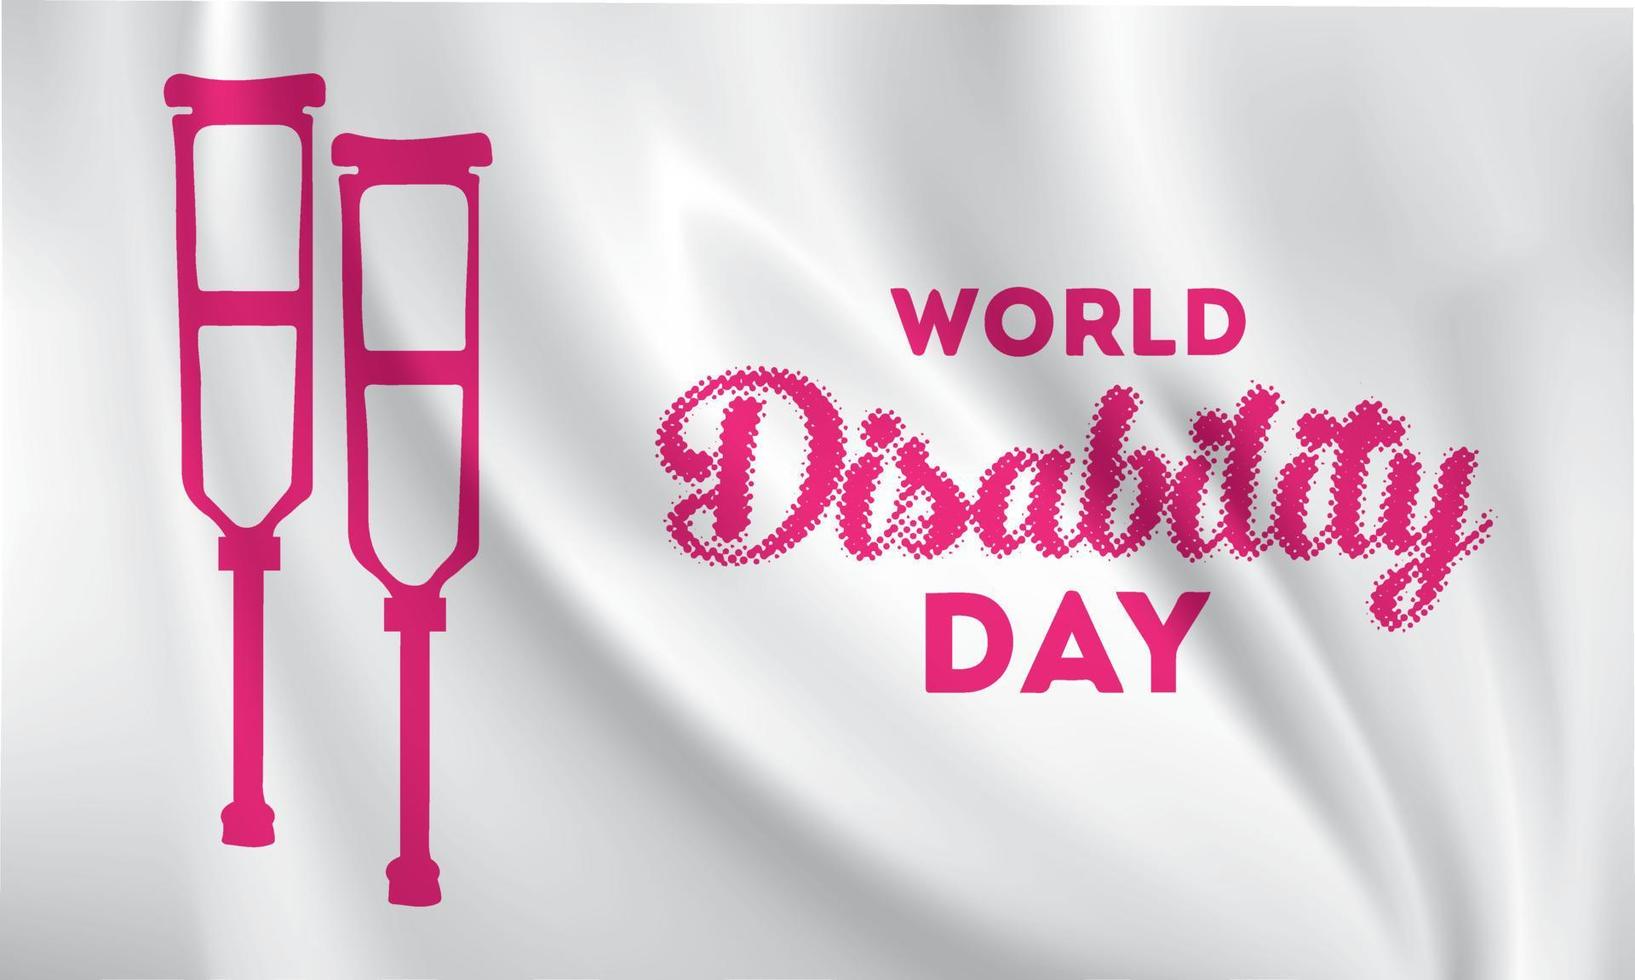 World Disability Day hand drawn with with crutches background. December 3 - world disability day greeting card template in flat design vector illustration.